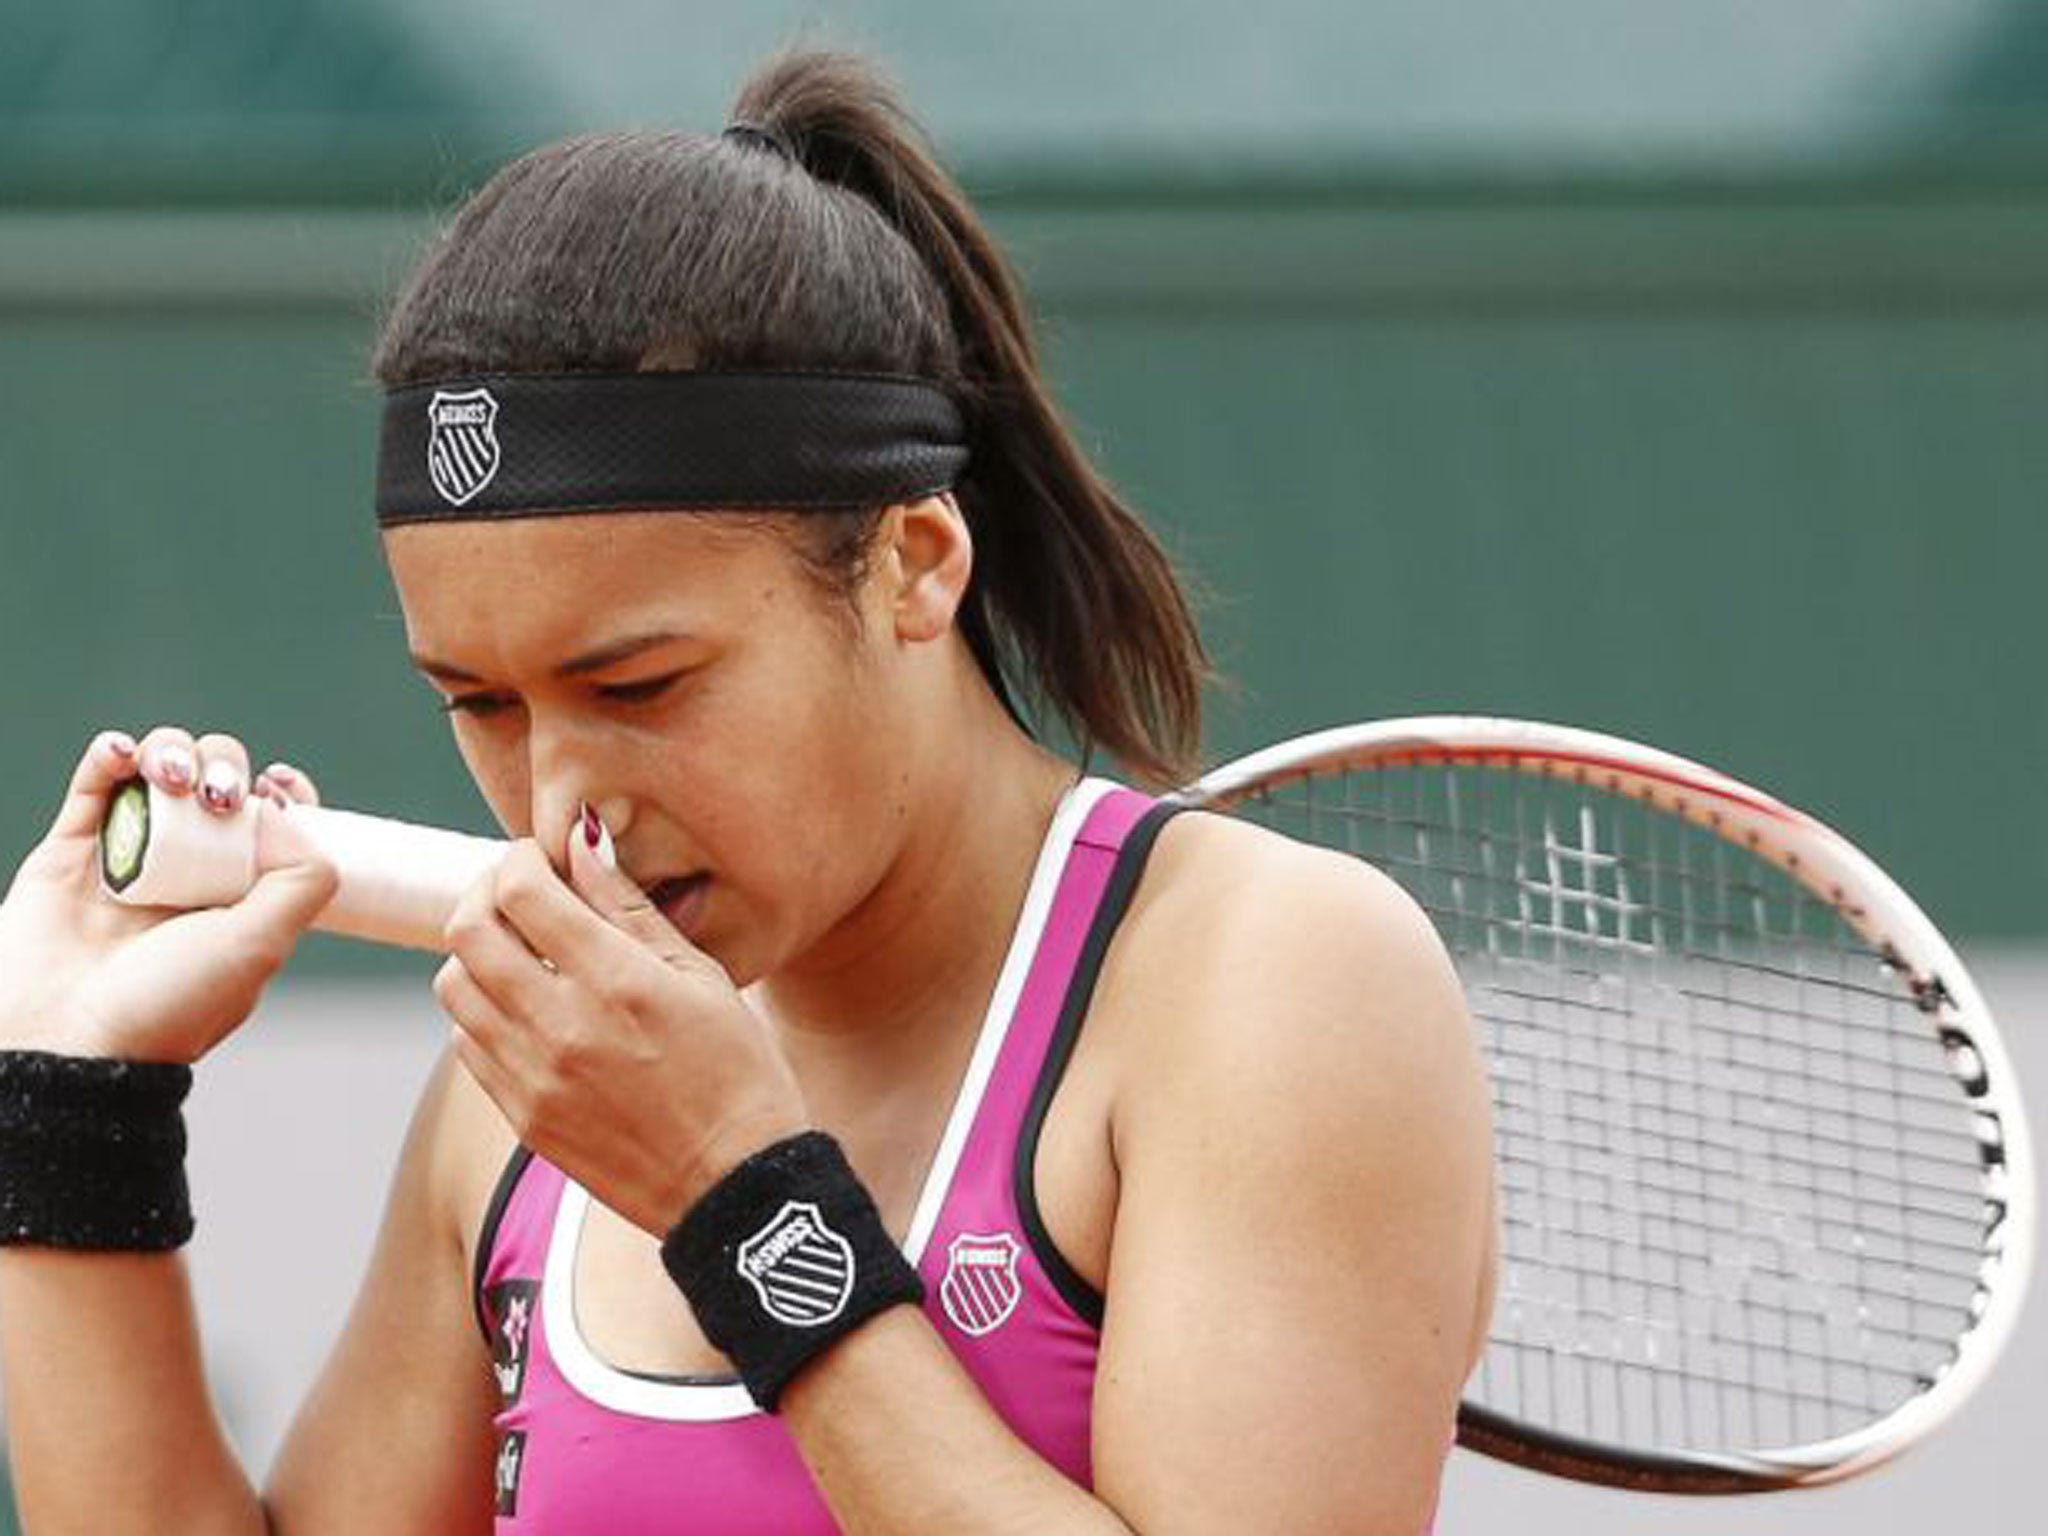 Heather Watson on her way to defeat at the French Open